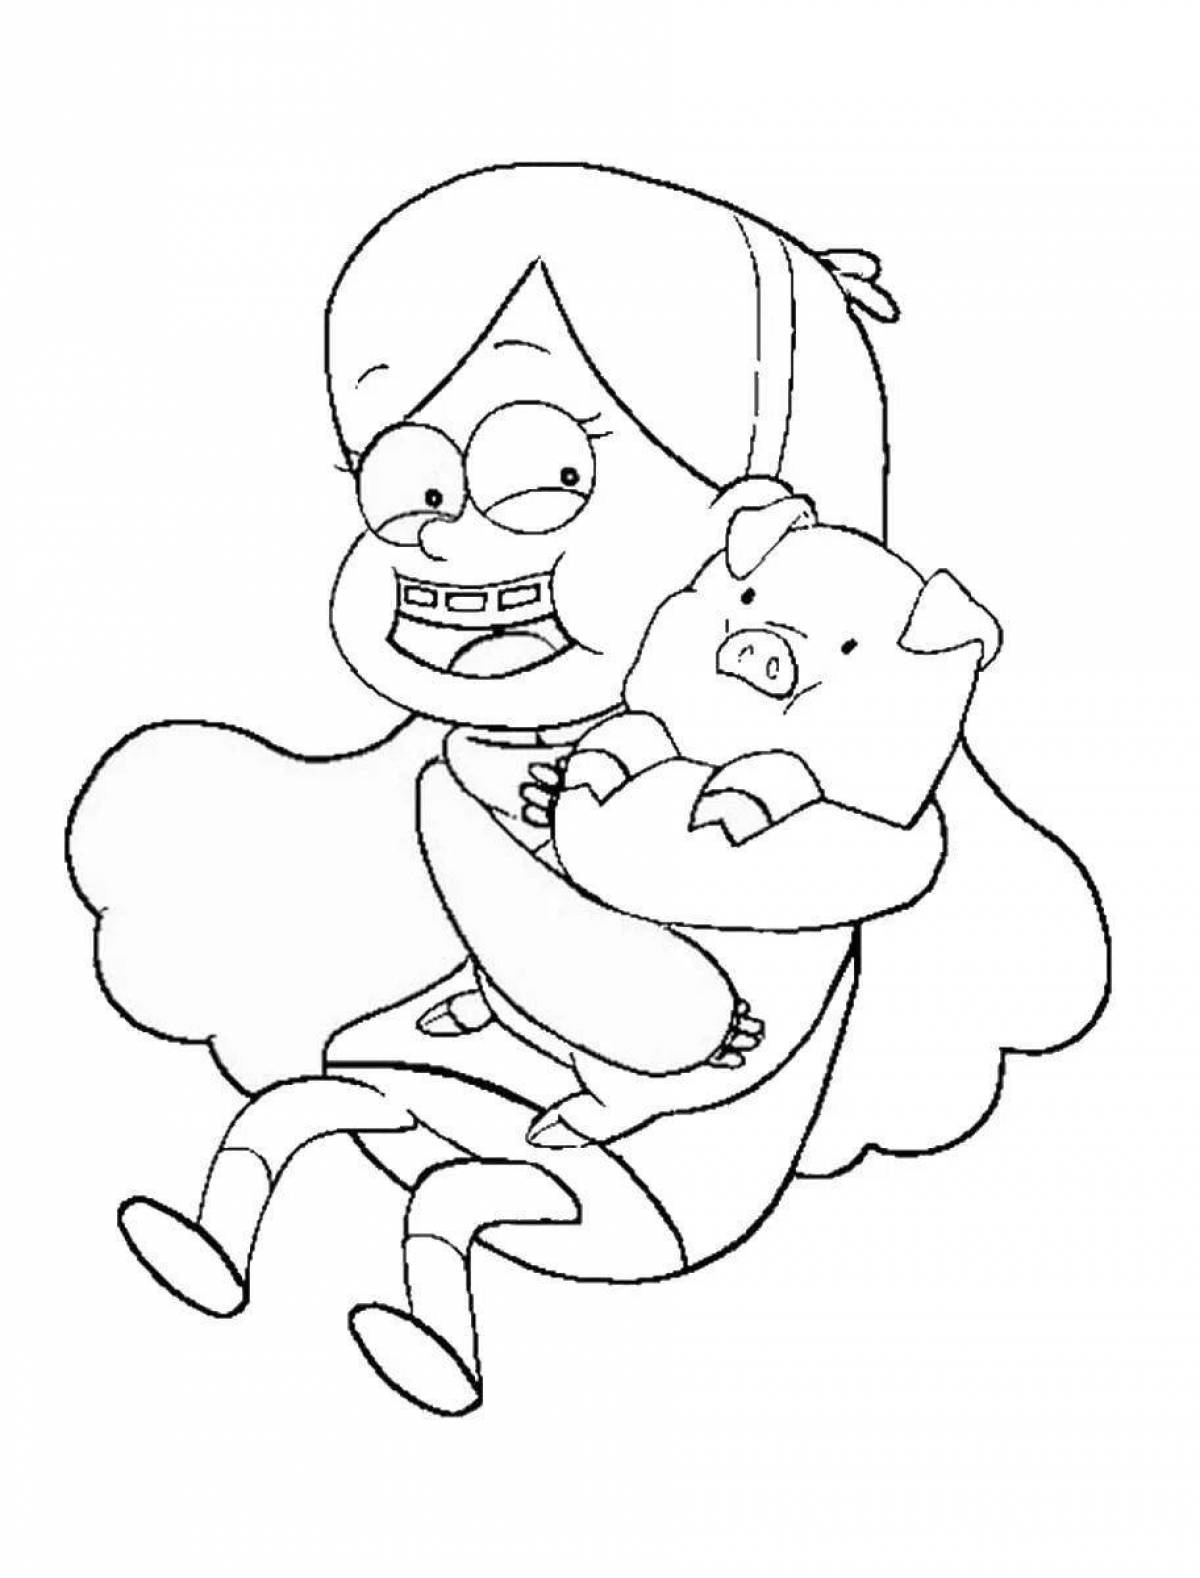 Dipper and Mabel coloring pages color-explosive